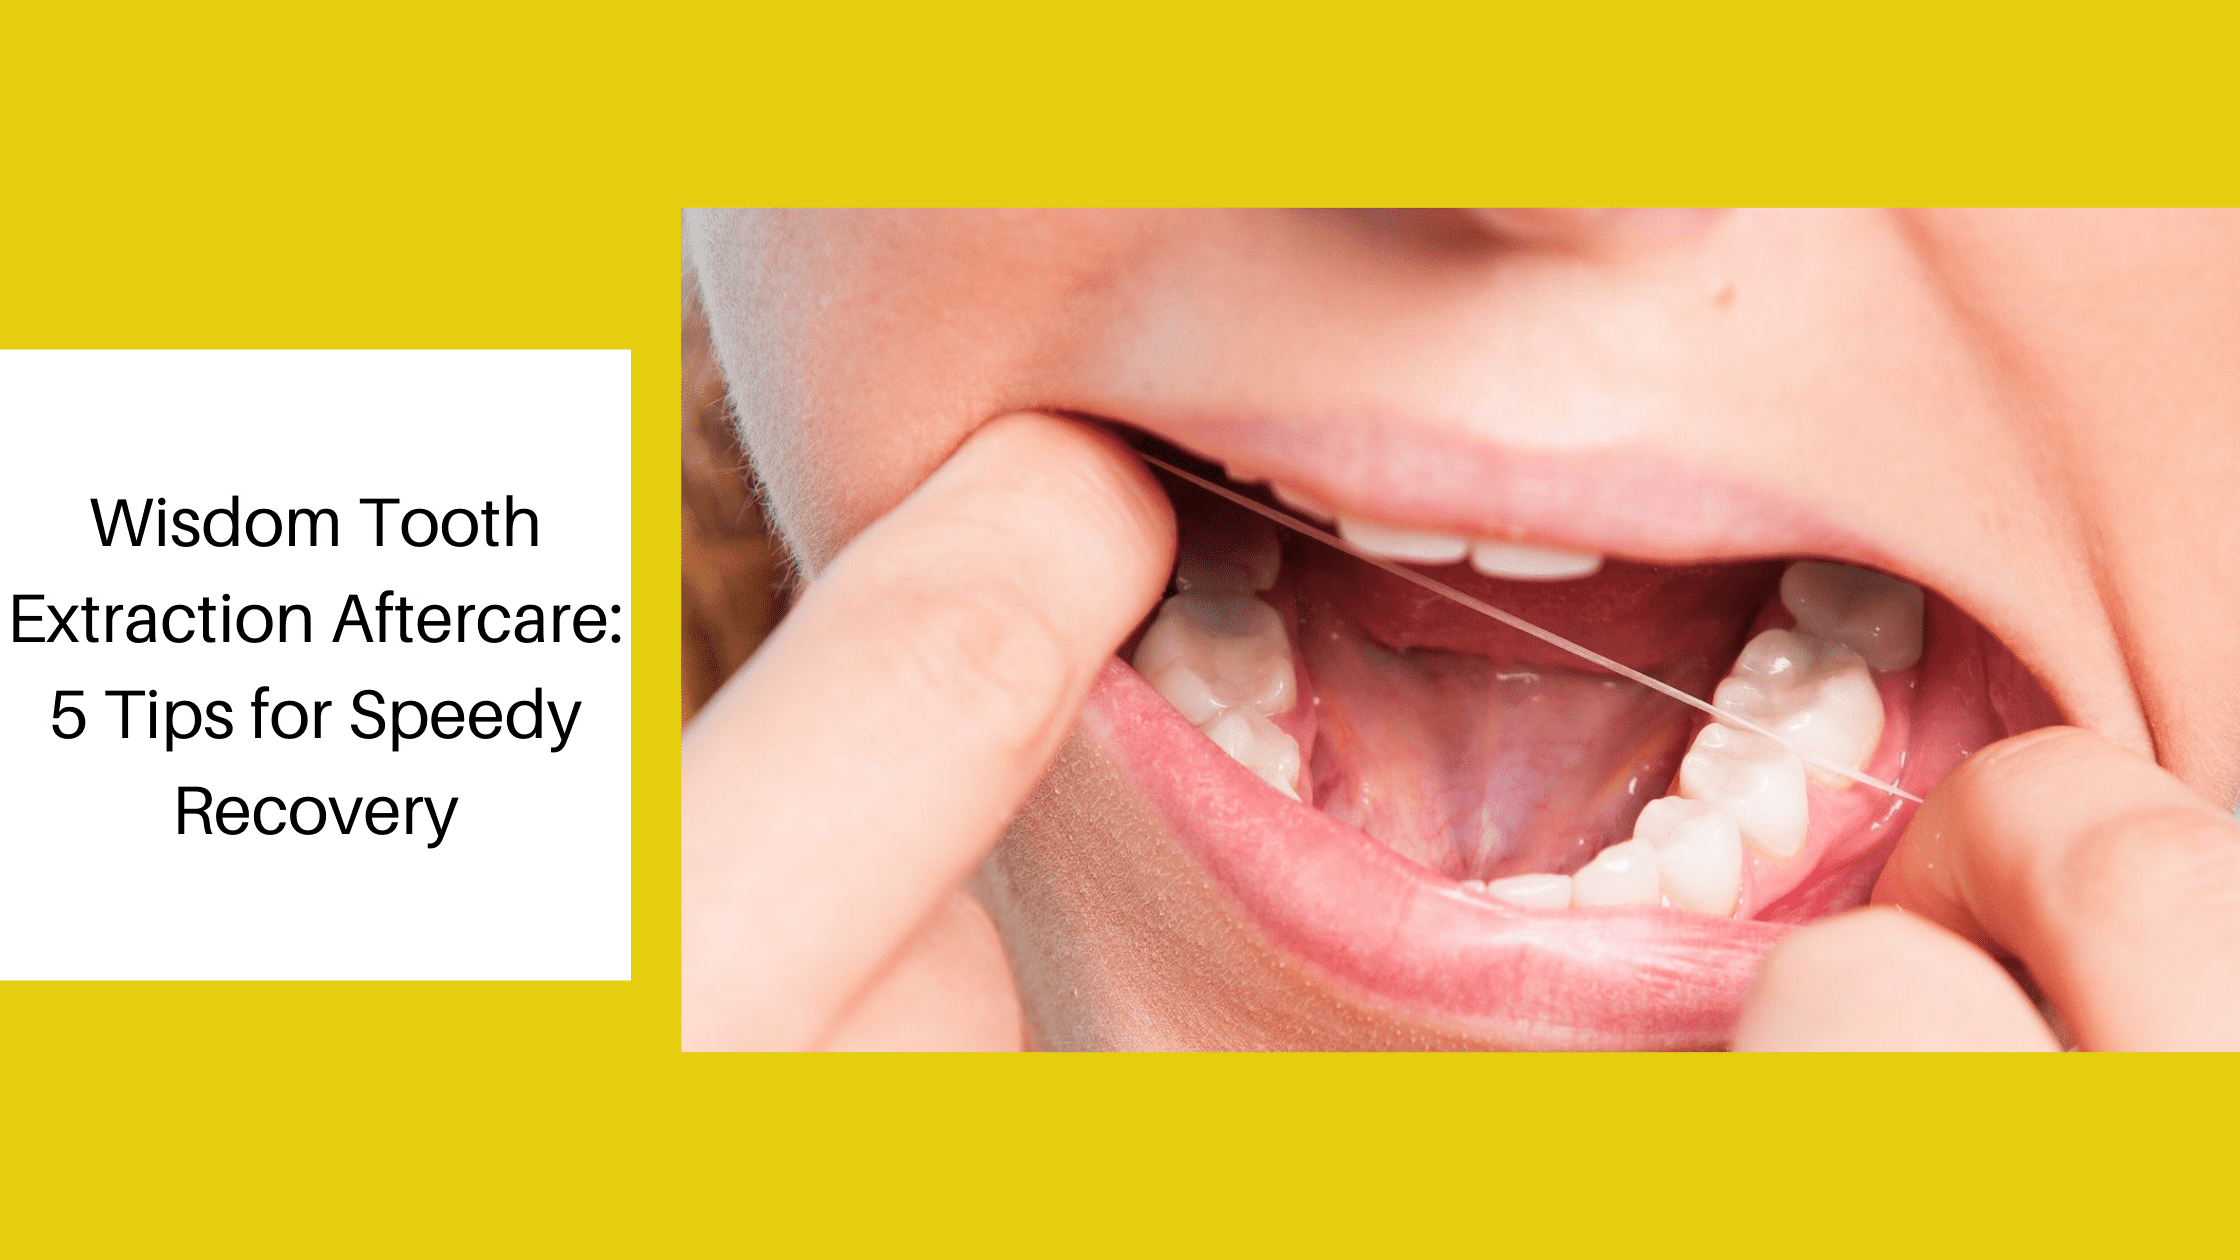 Wisdom Tooth Extraction Aftercare: 5 Tips for Speedy Recovery